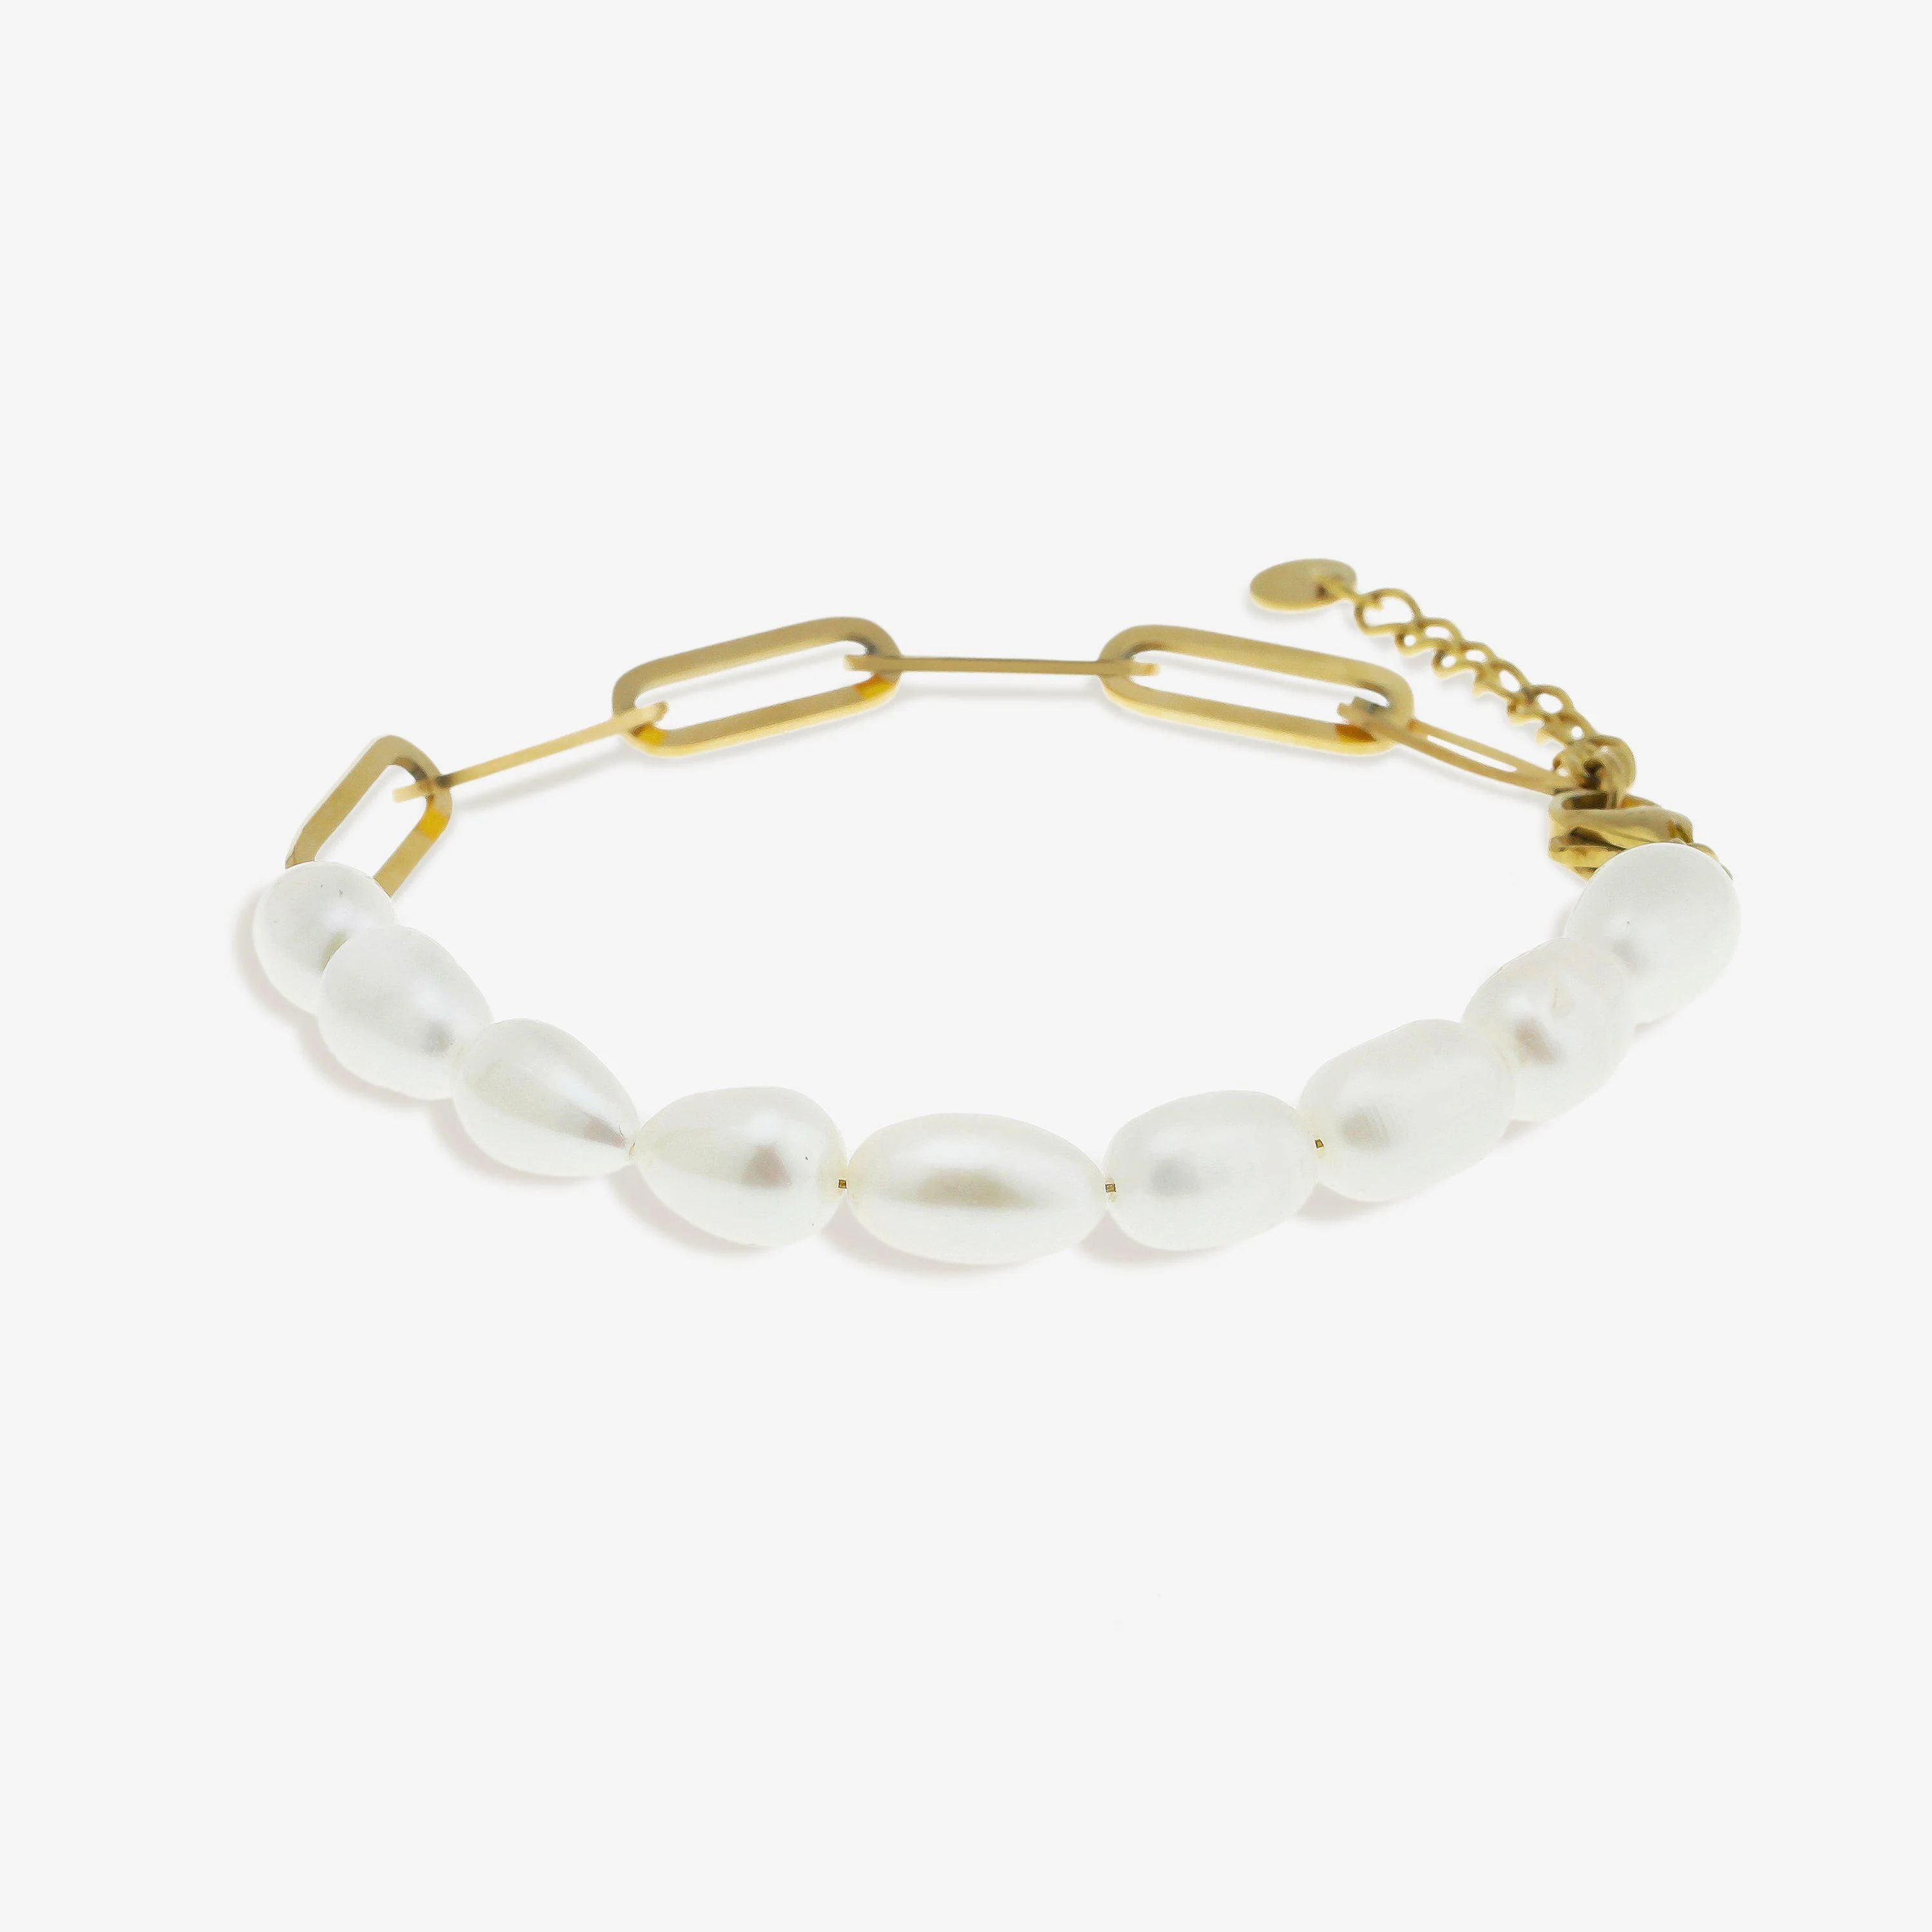 Gold Paperclip Chain Bracelet with Pearls | Victoria Emerson